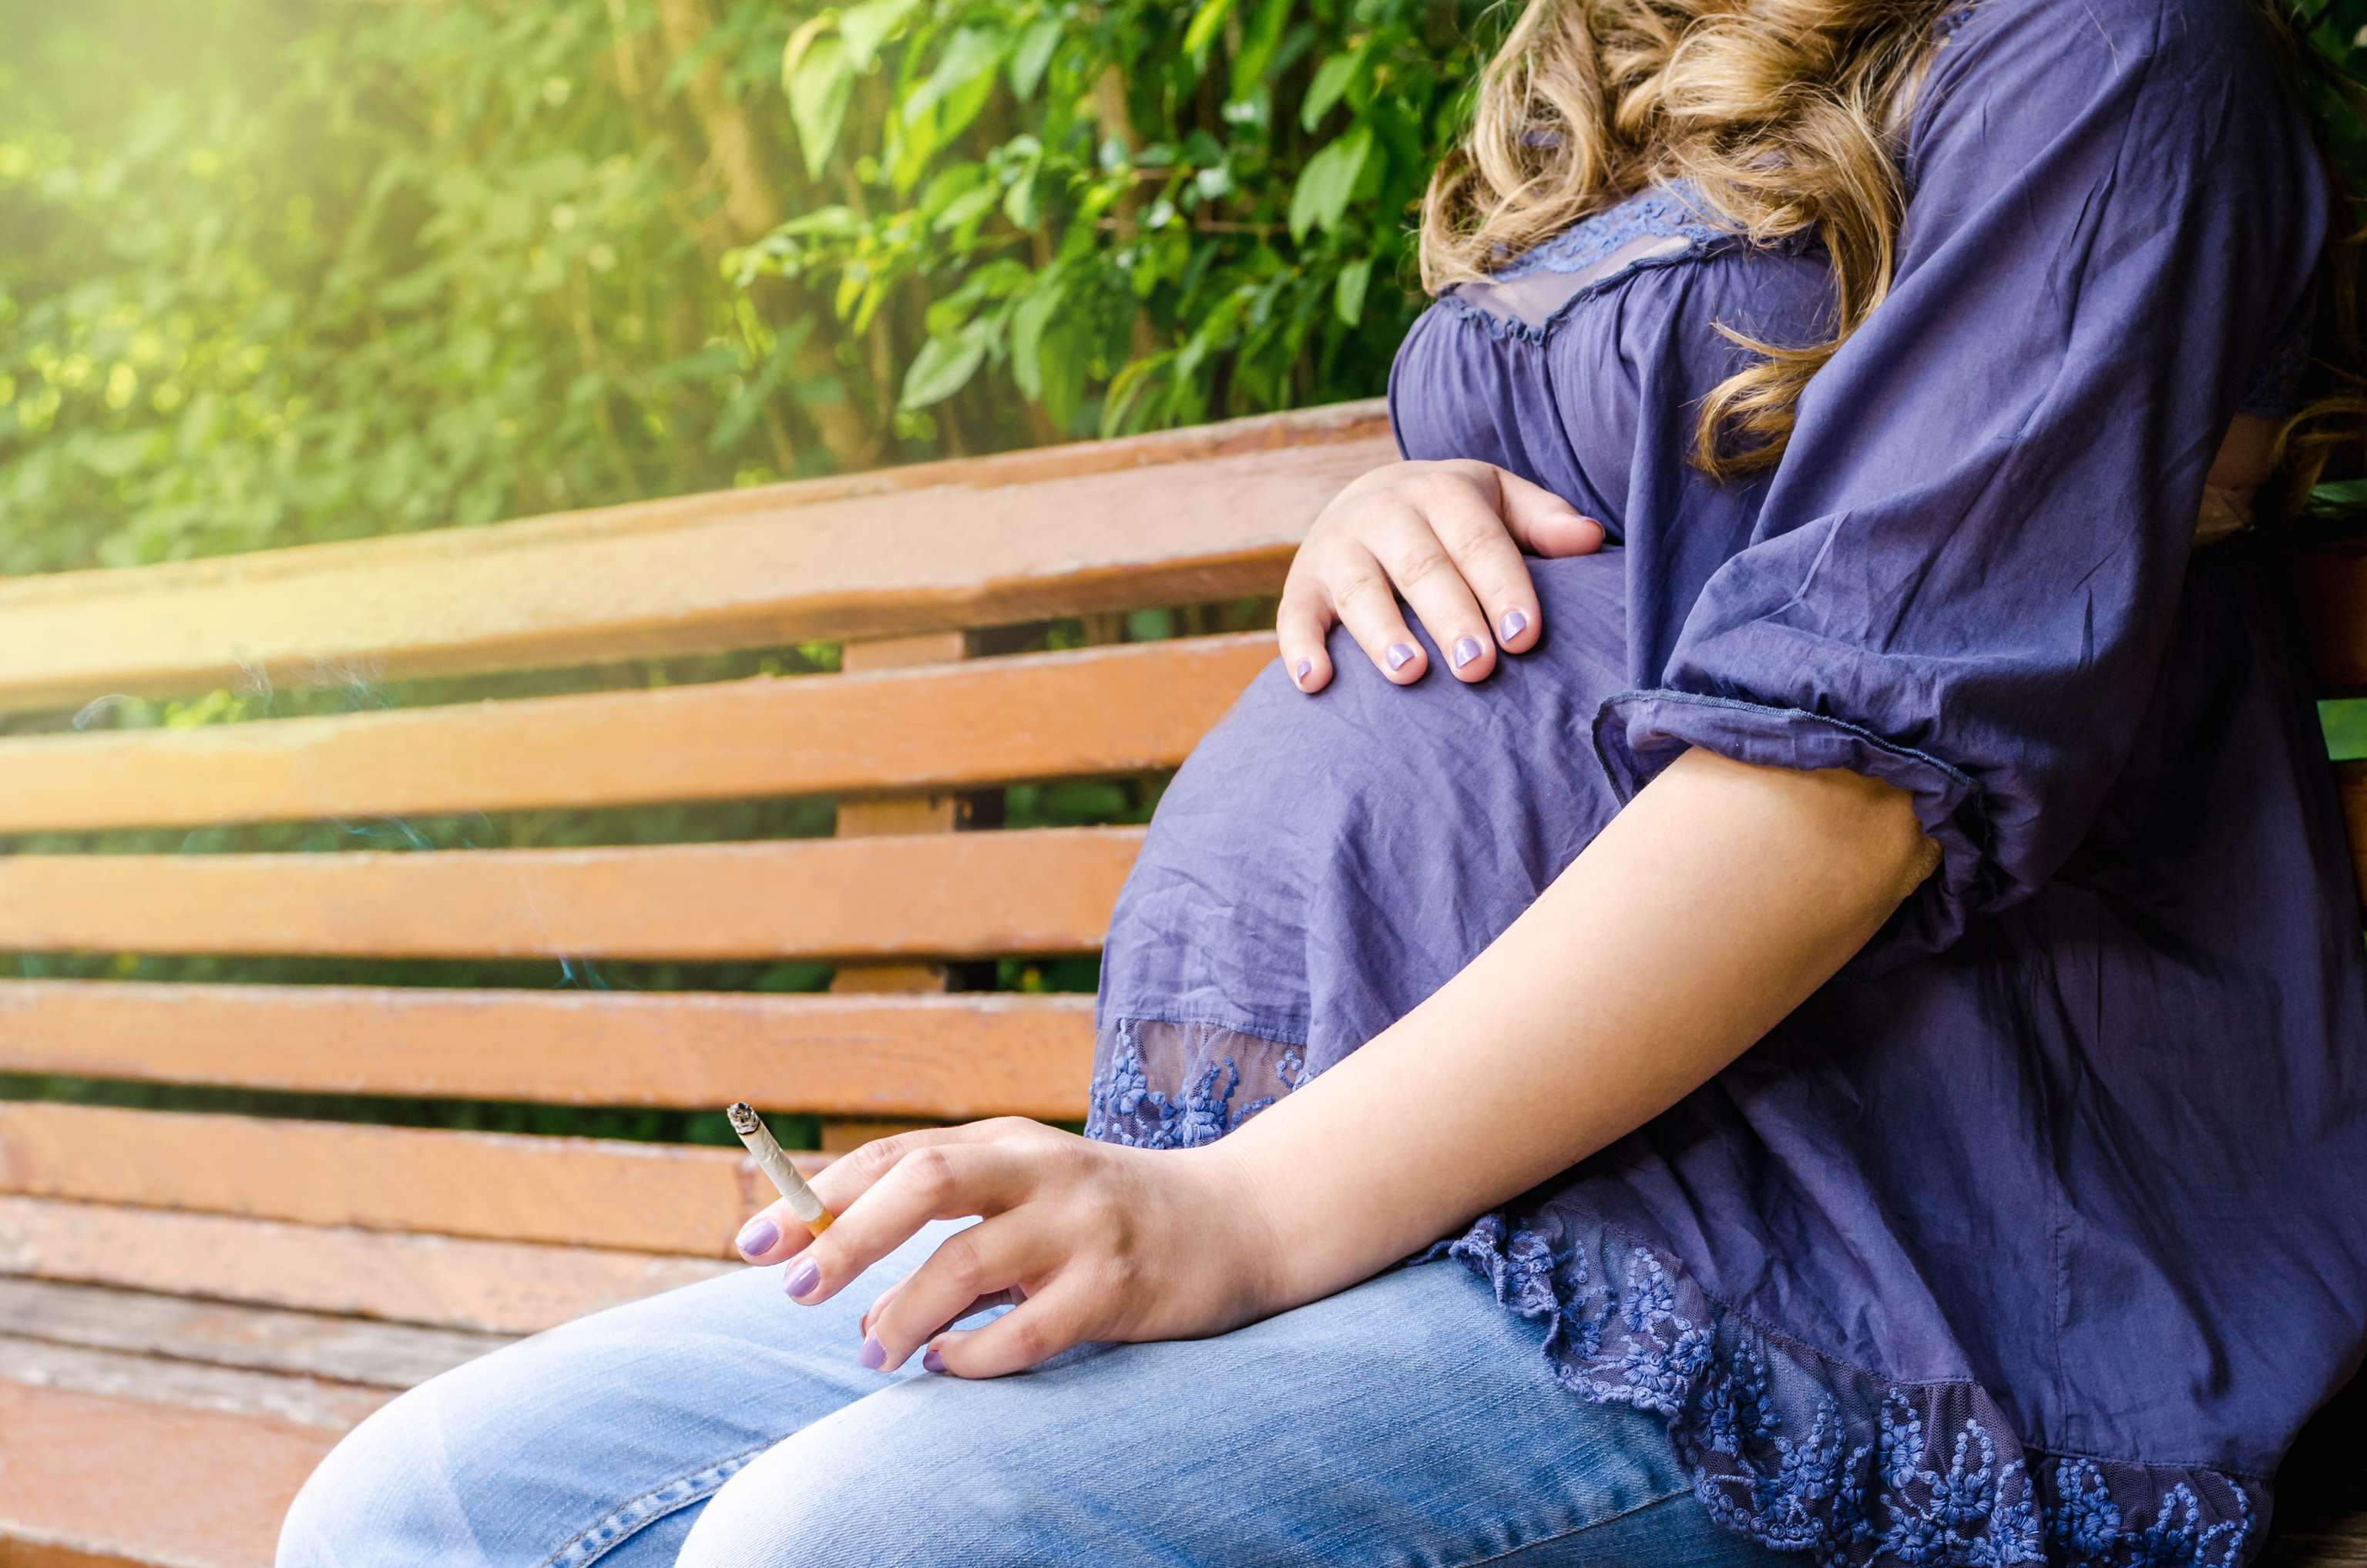 Is there a link between smoking during pregnancy and allergic rhinitis in the offspring?